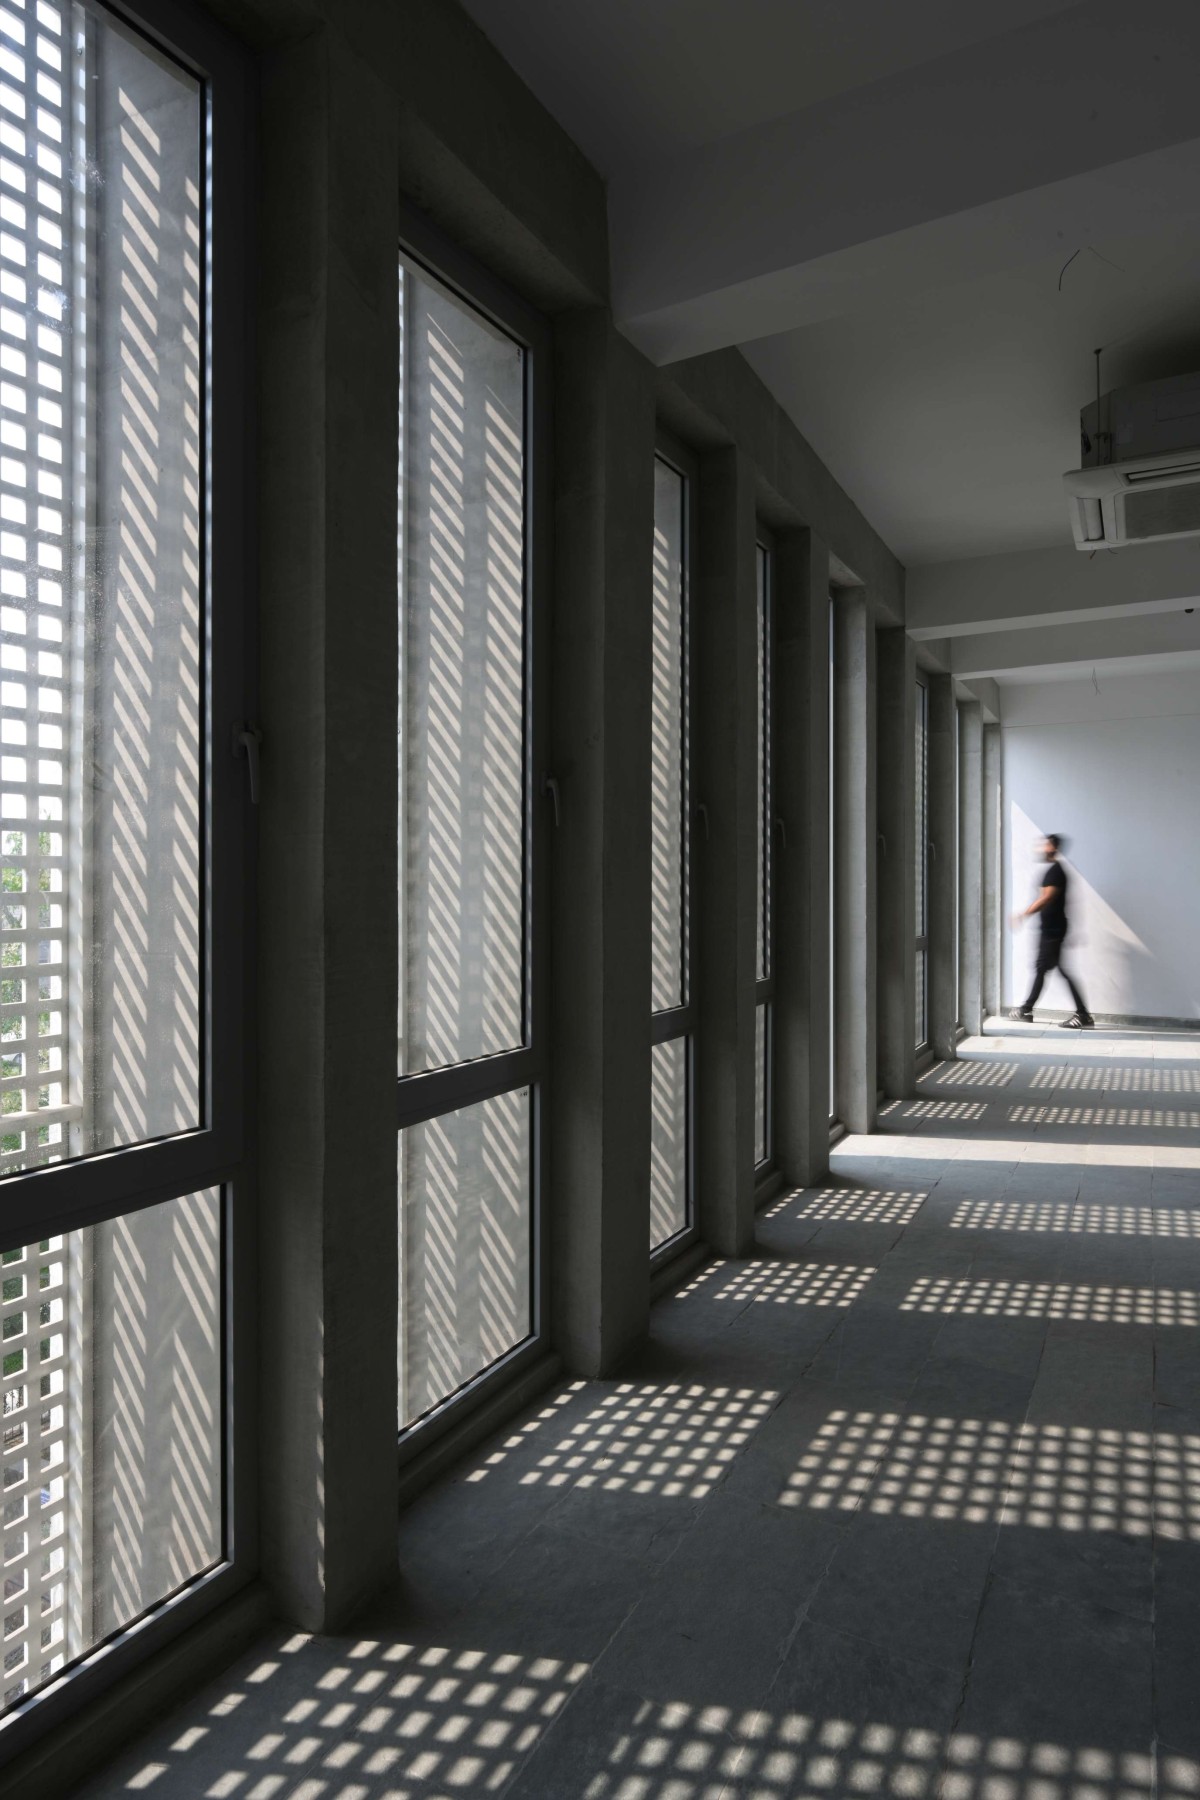 Interior view of Veiled Building by KUN Studio